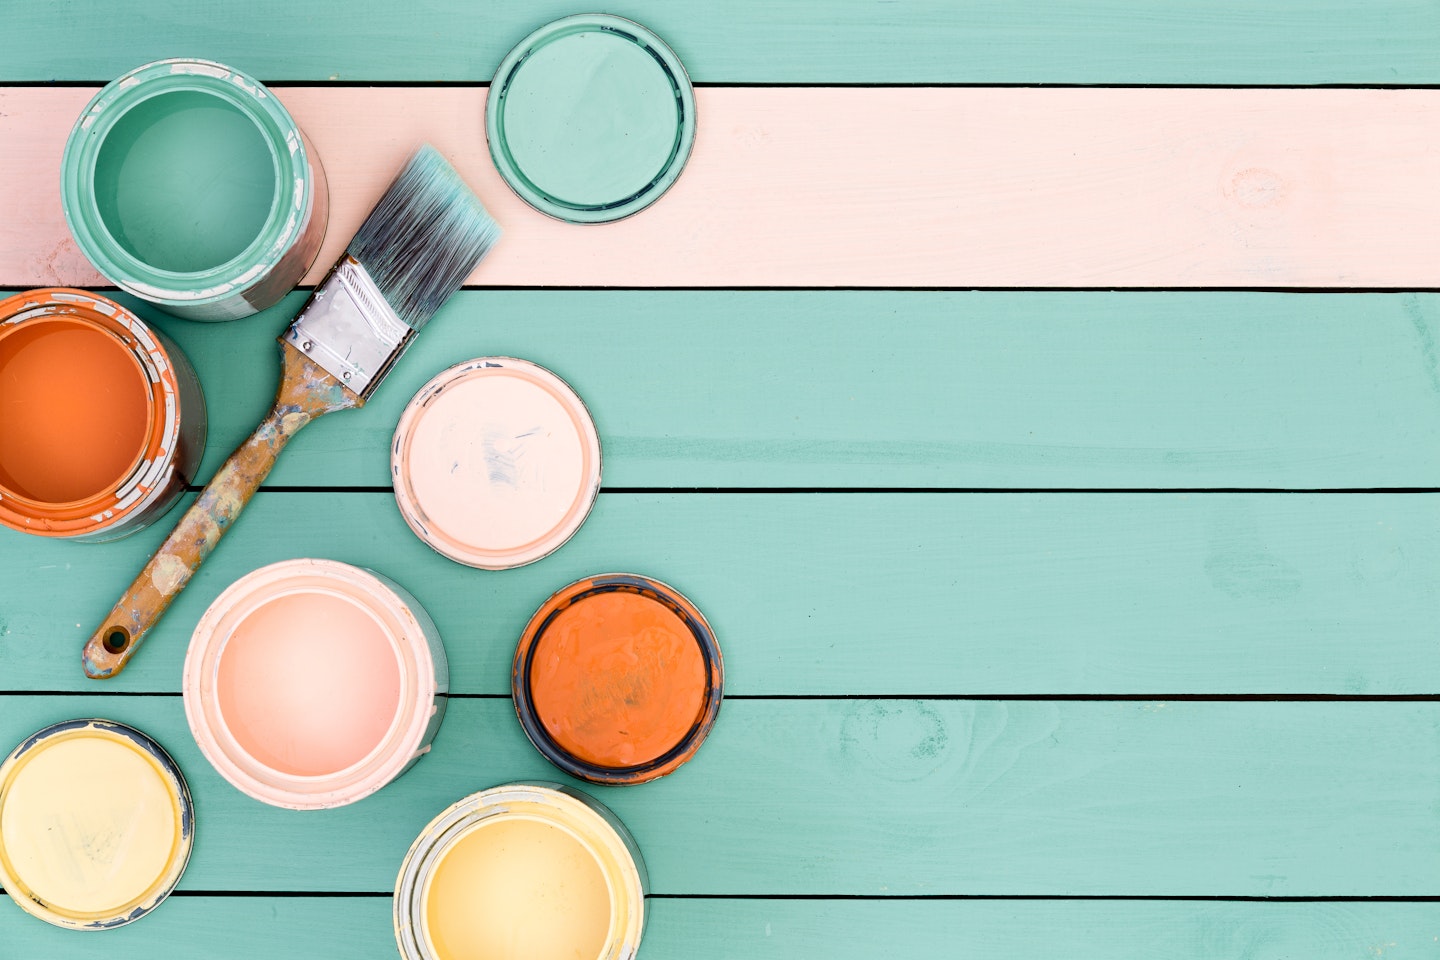 The Best Paint To Buy For Wooden Floors, Crafts, Furniture and More